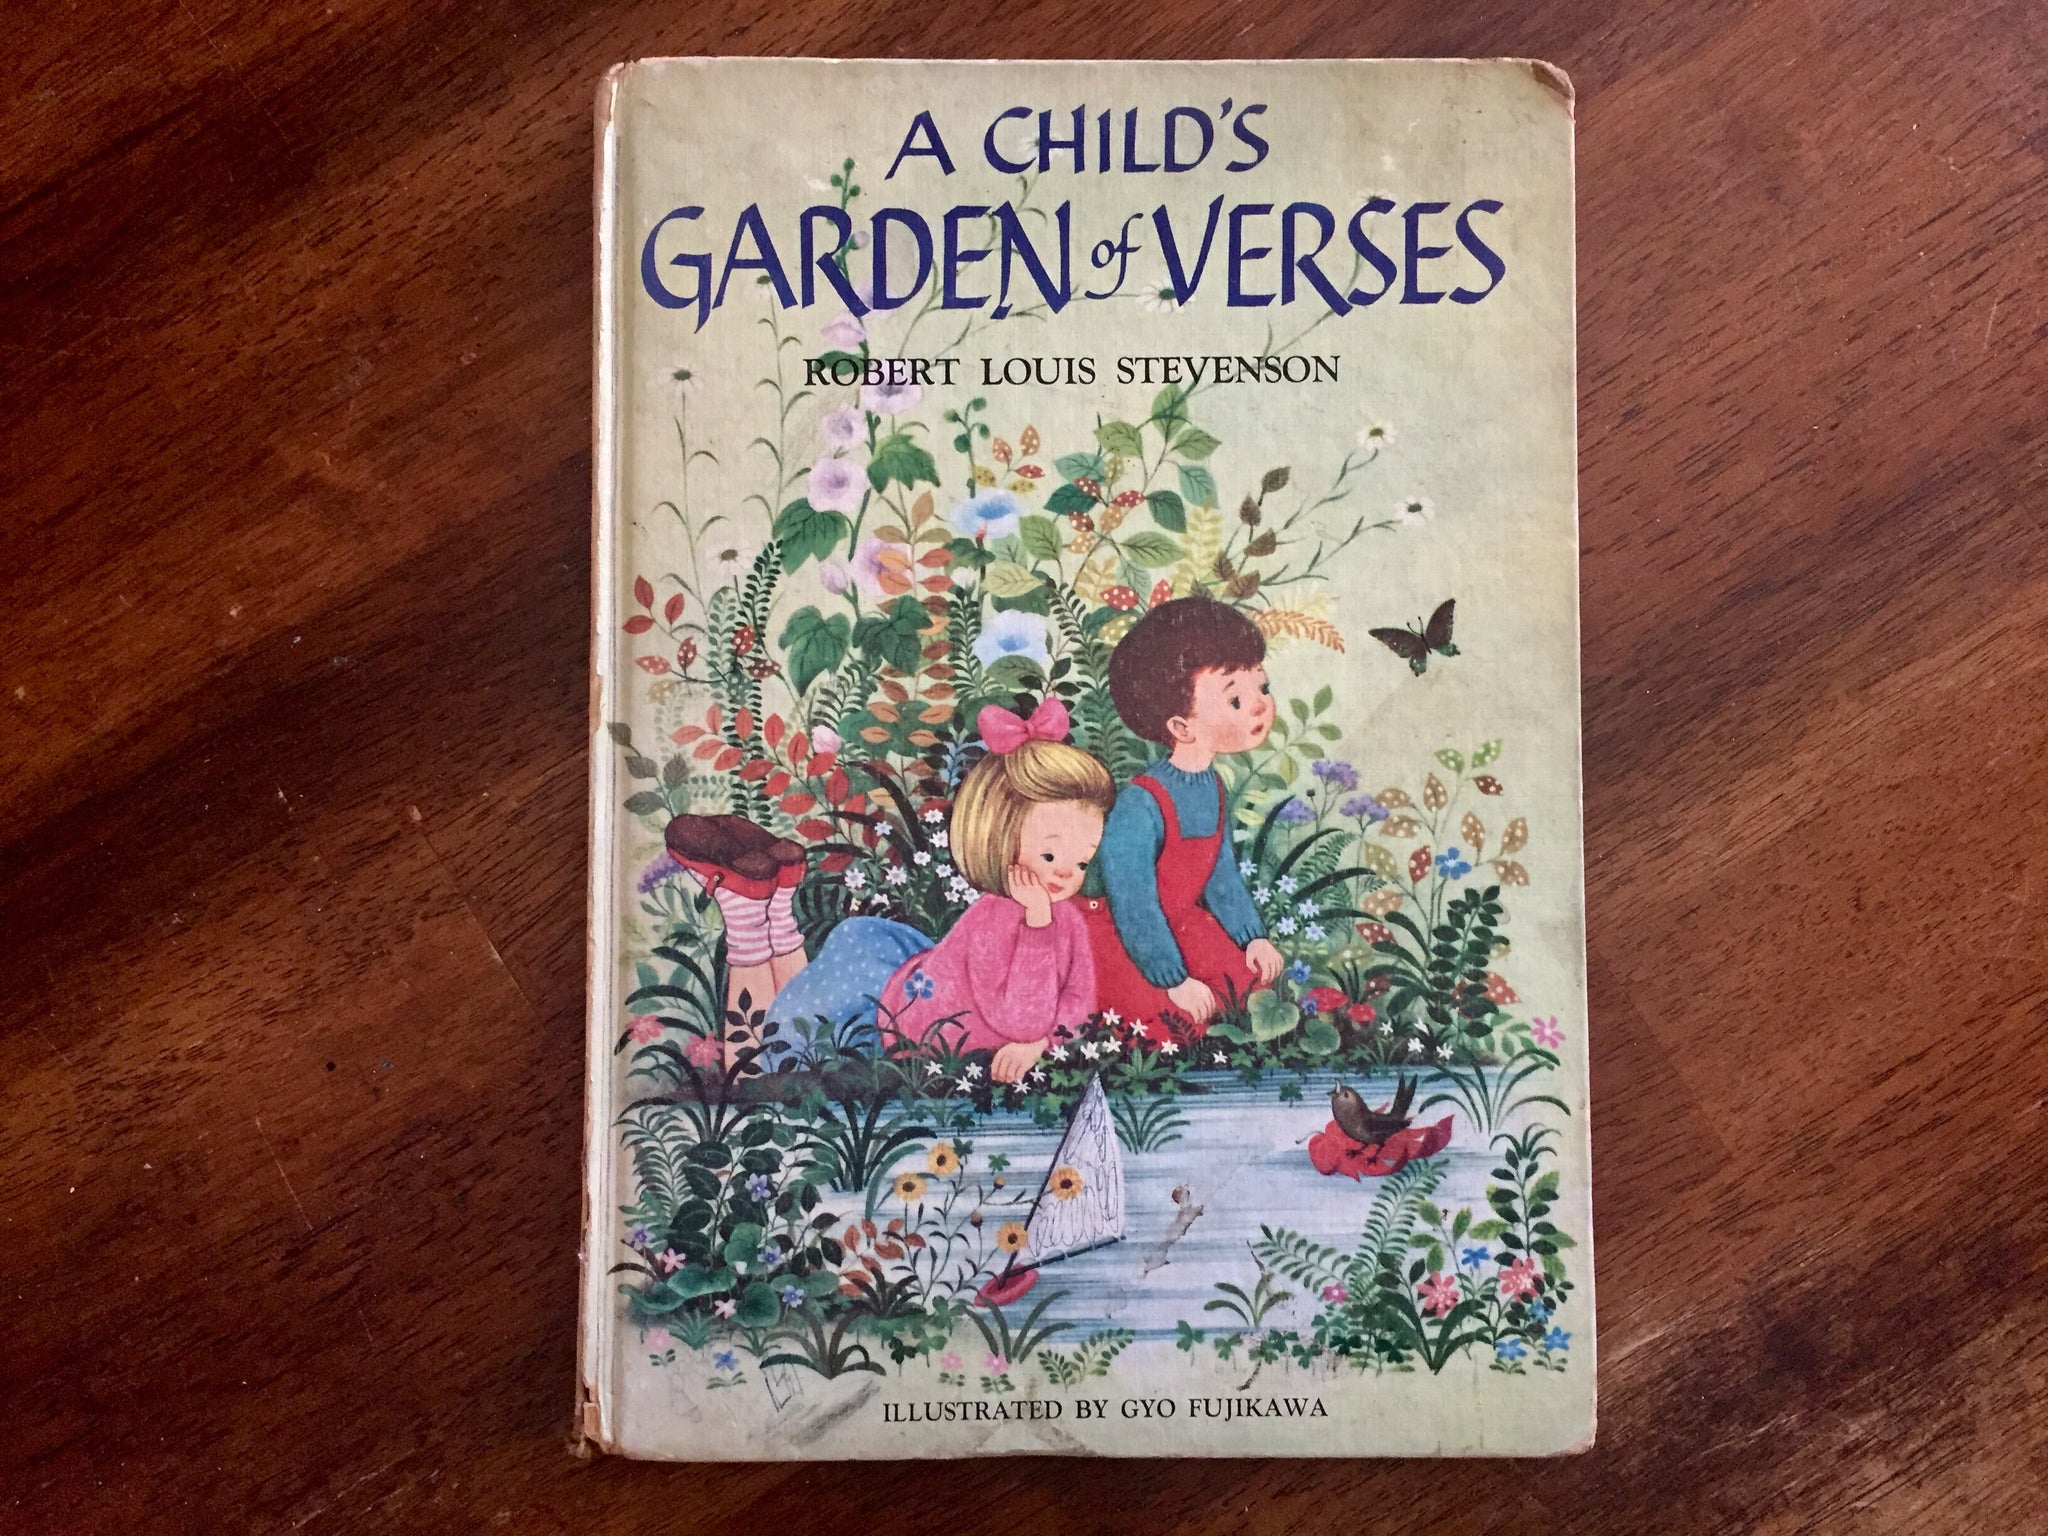 A Child's Garden of Verses by Robert Louis Stevenson illustrated edition